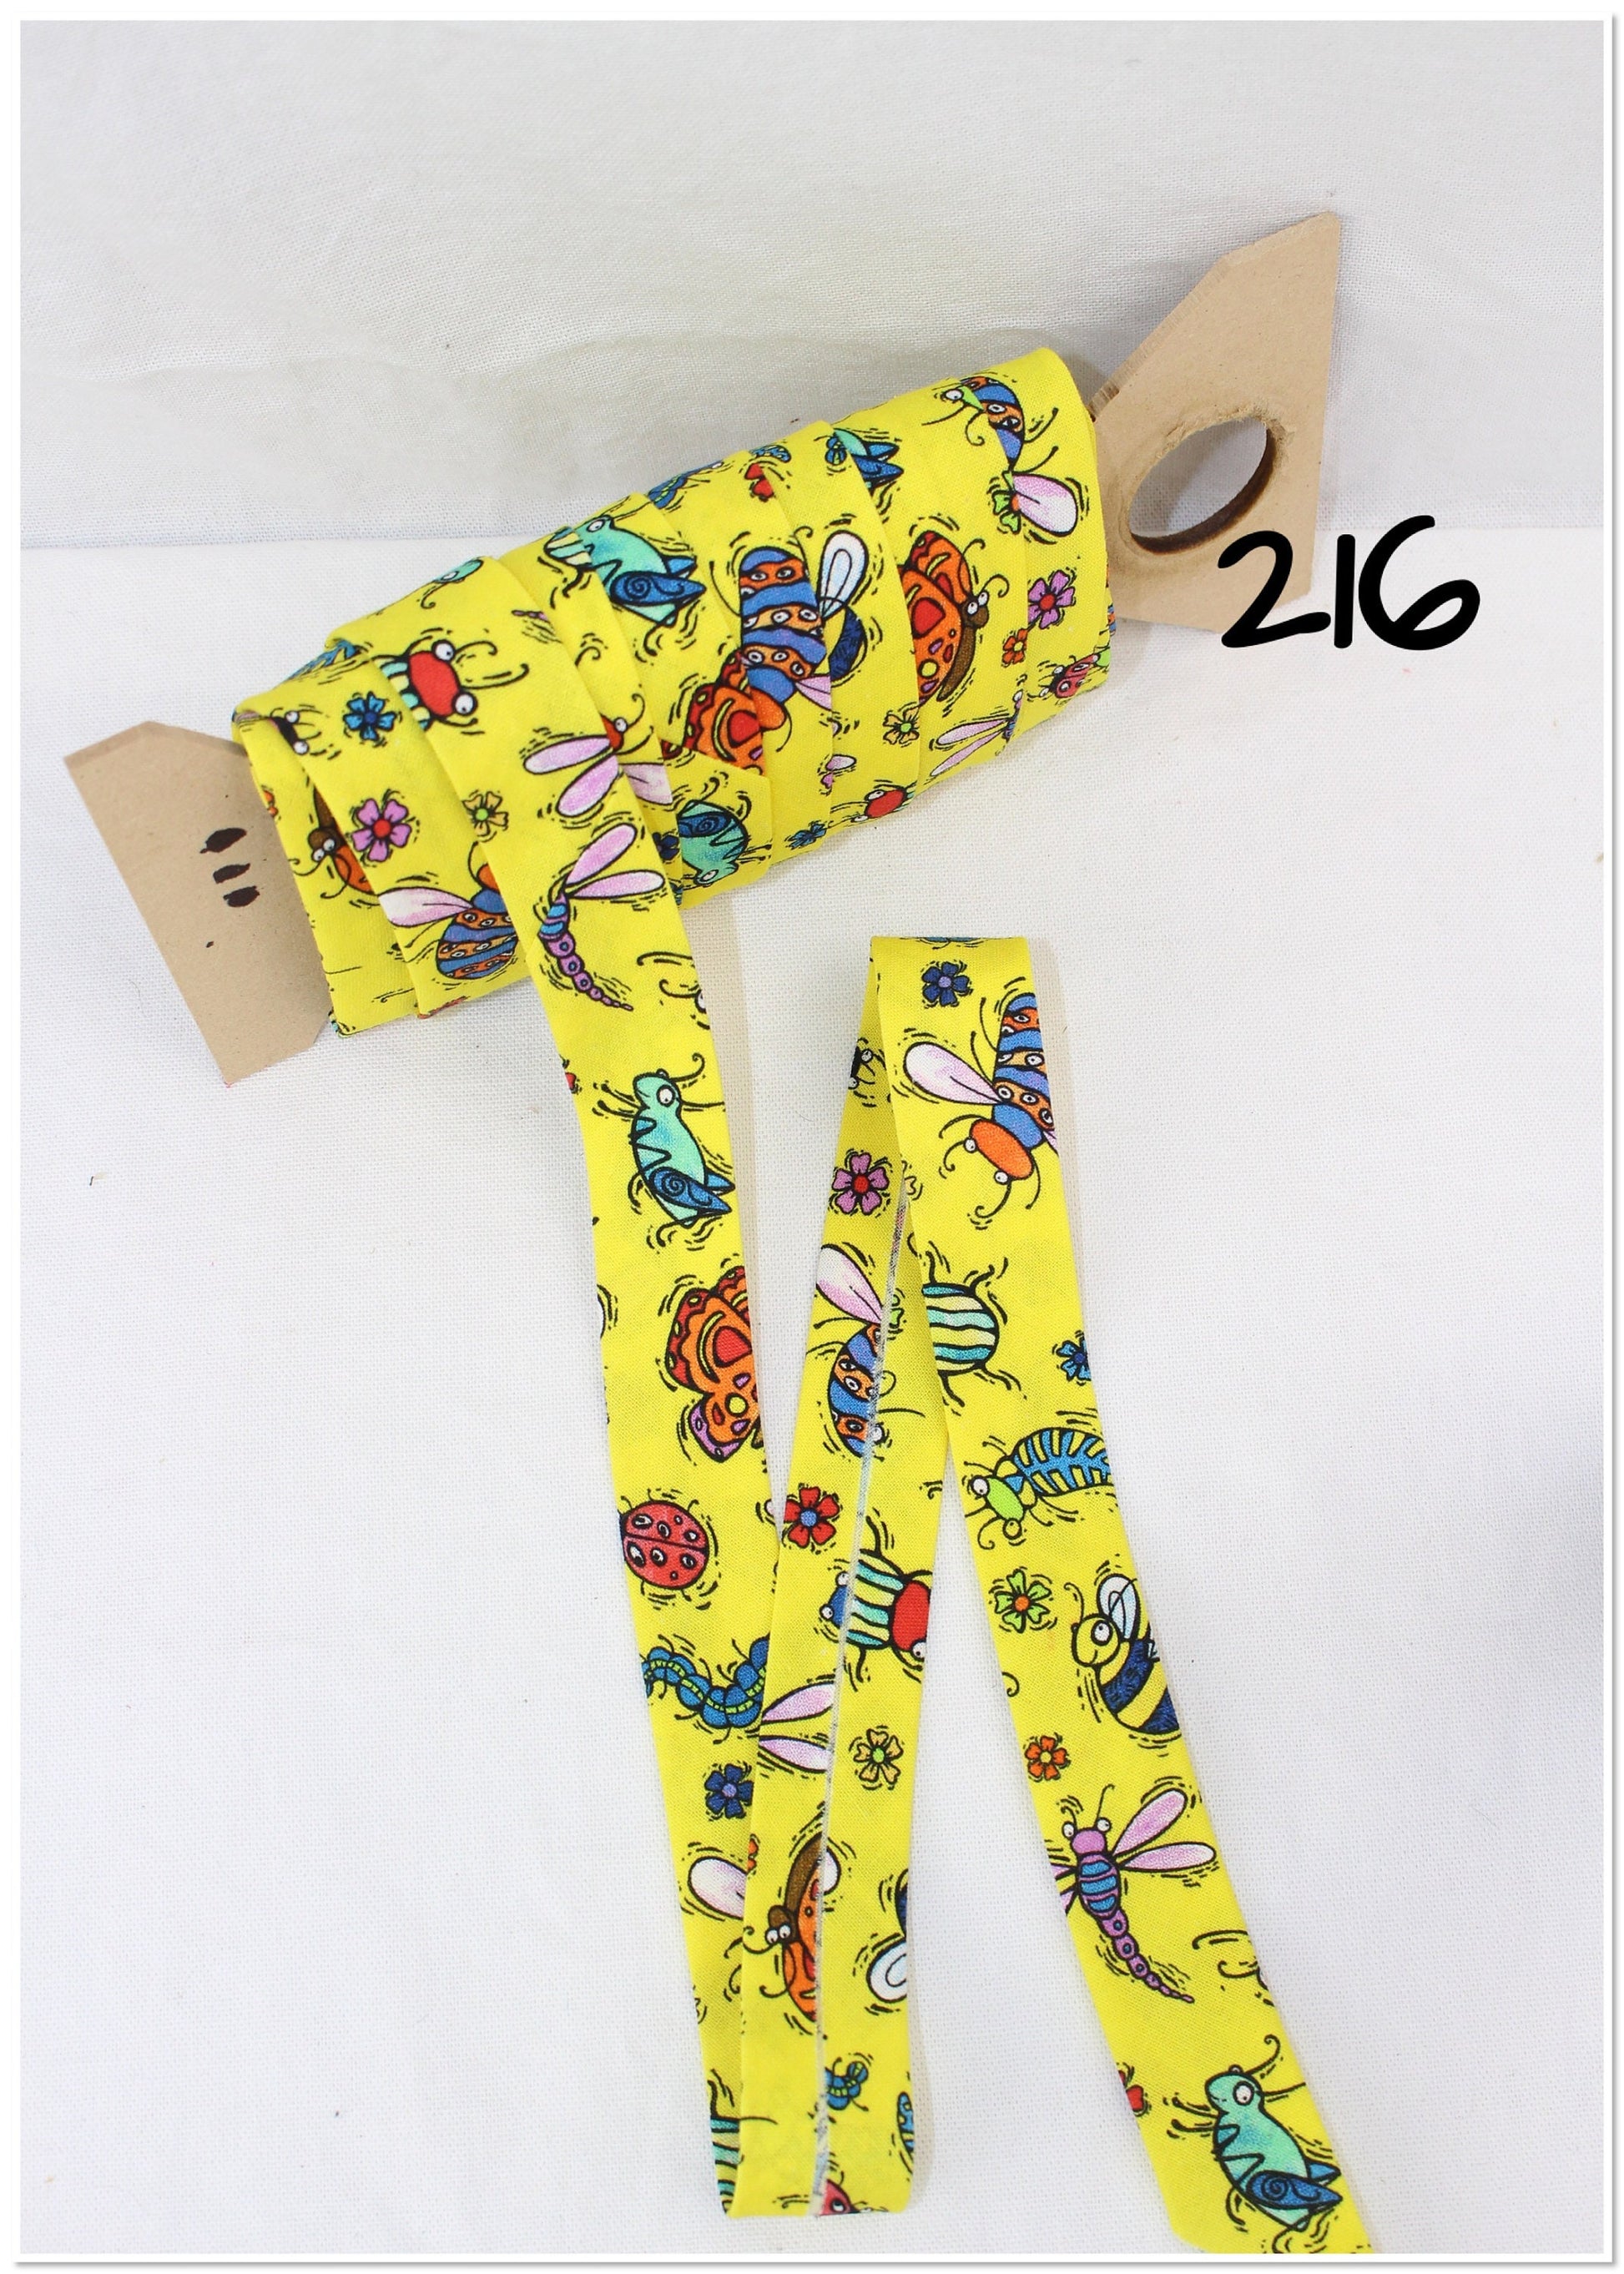 Bias Binding (Tape) 25mm, Cotton, Single Fold, bugs, flowers, patterned. Fusible iron on available.